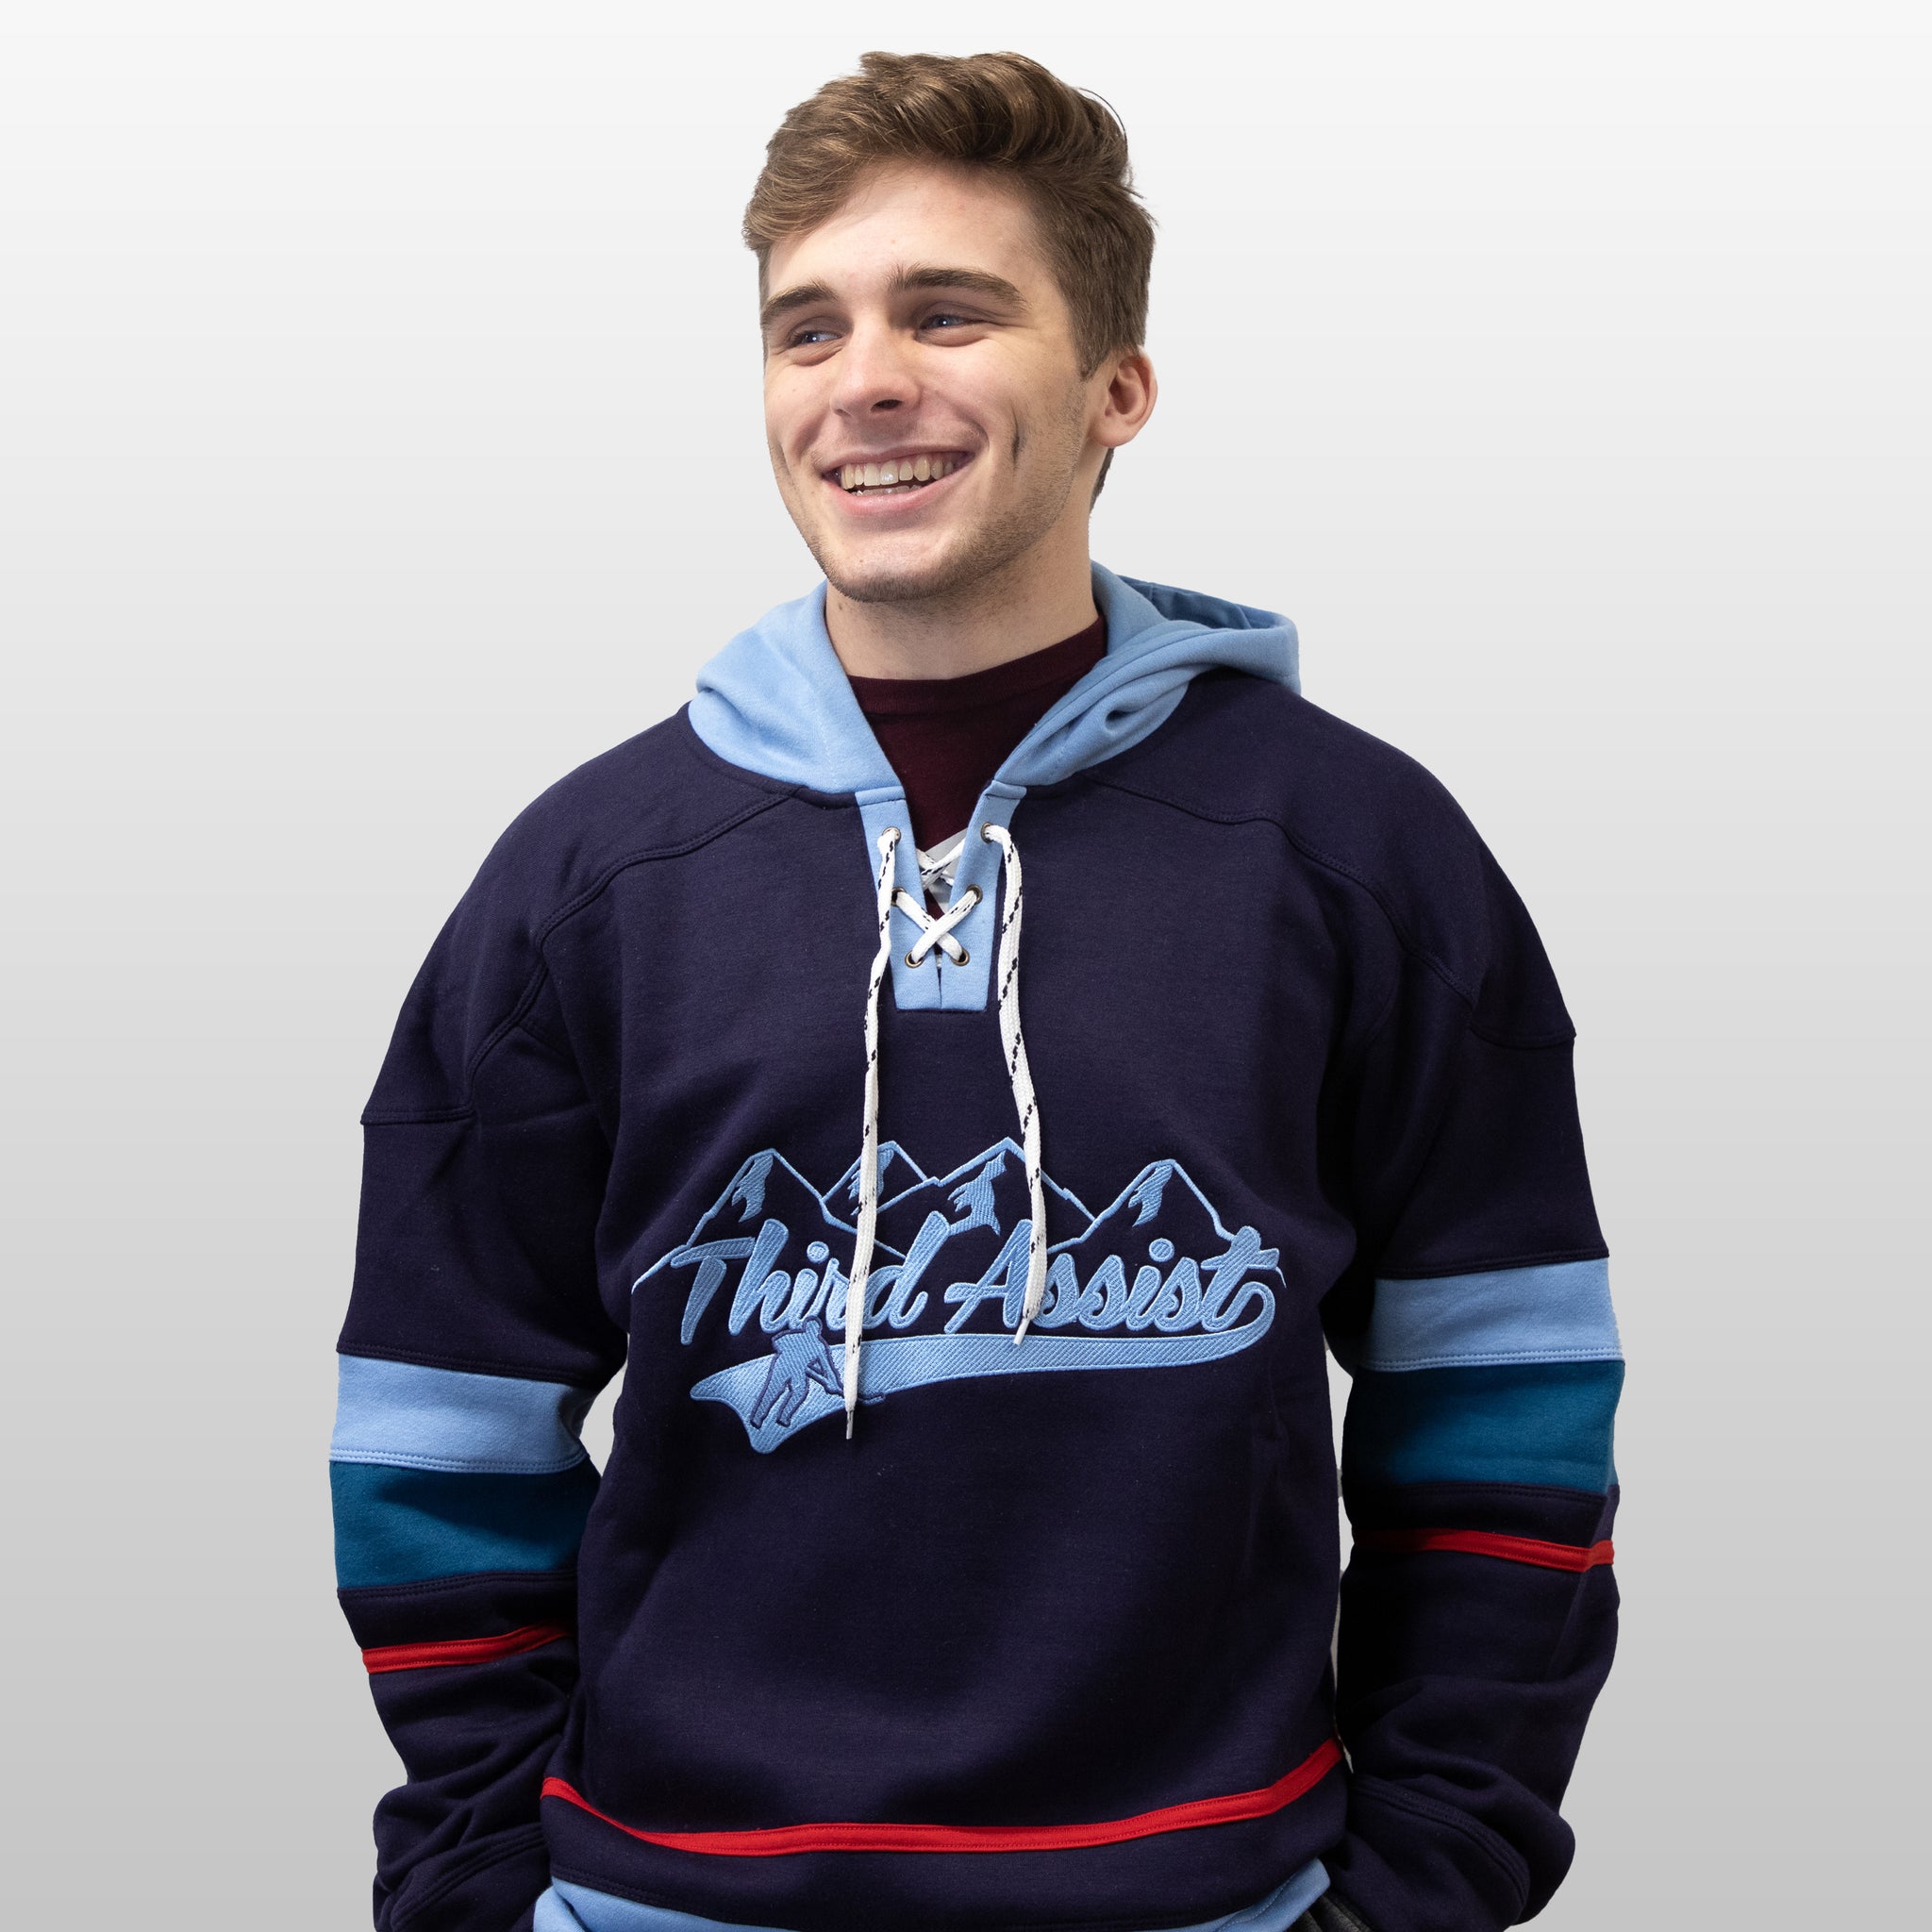 Third-Assist-Throwback-Sweater-Front